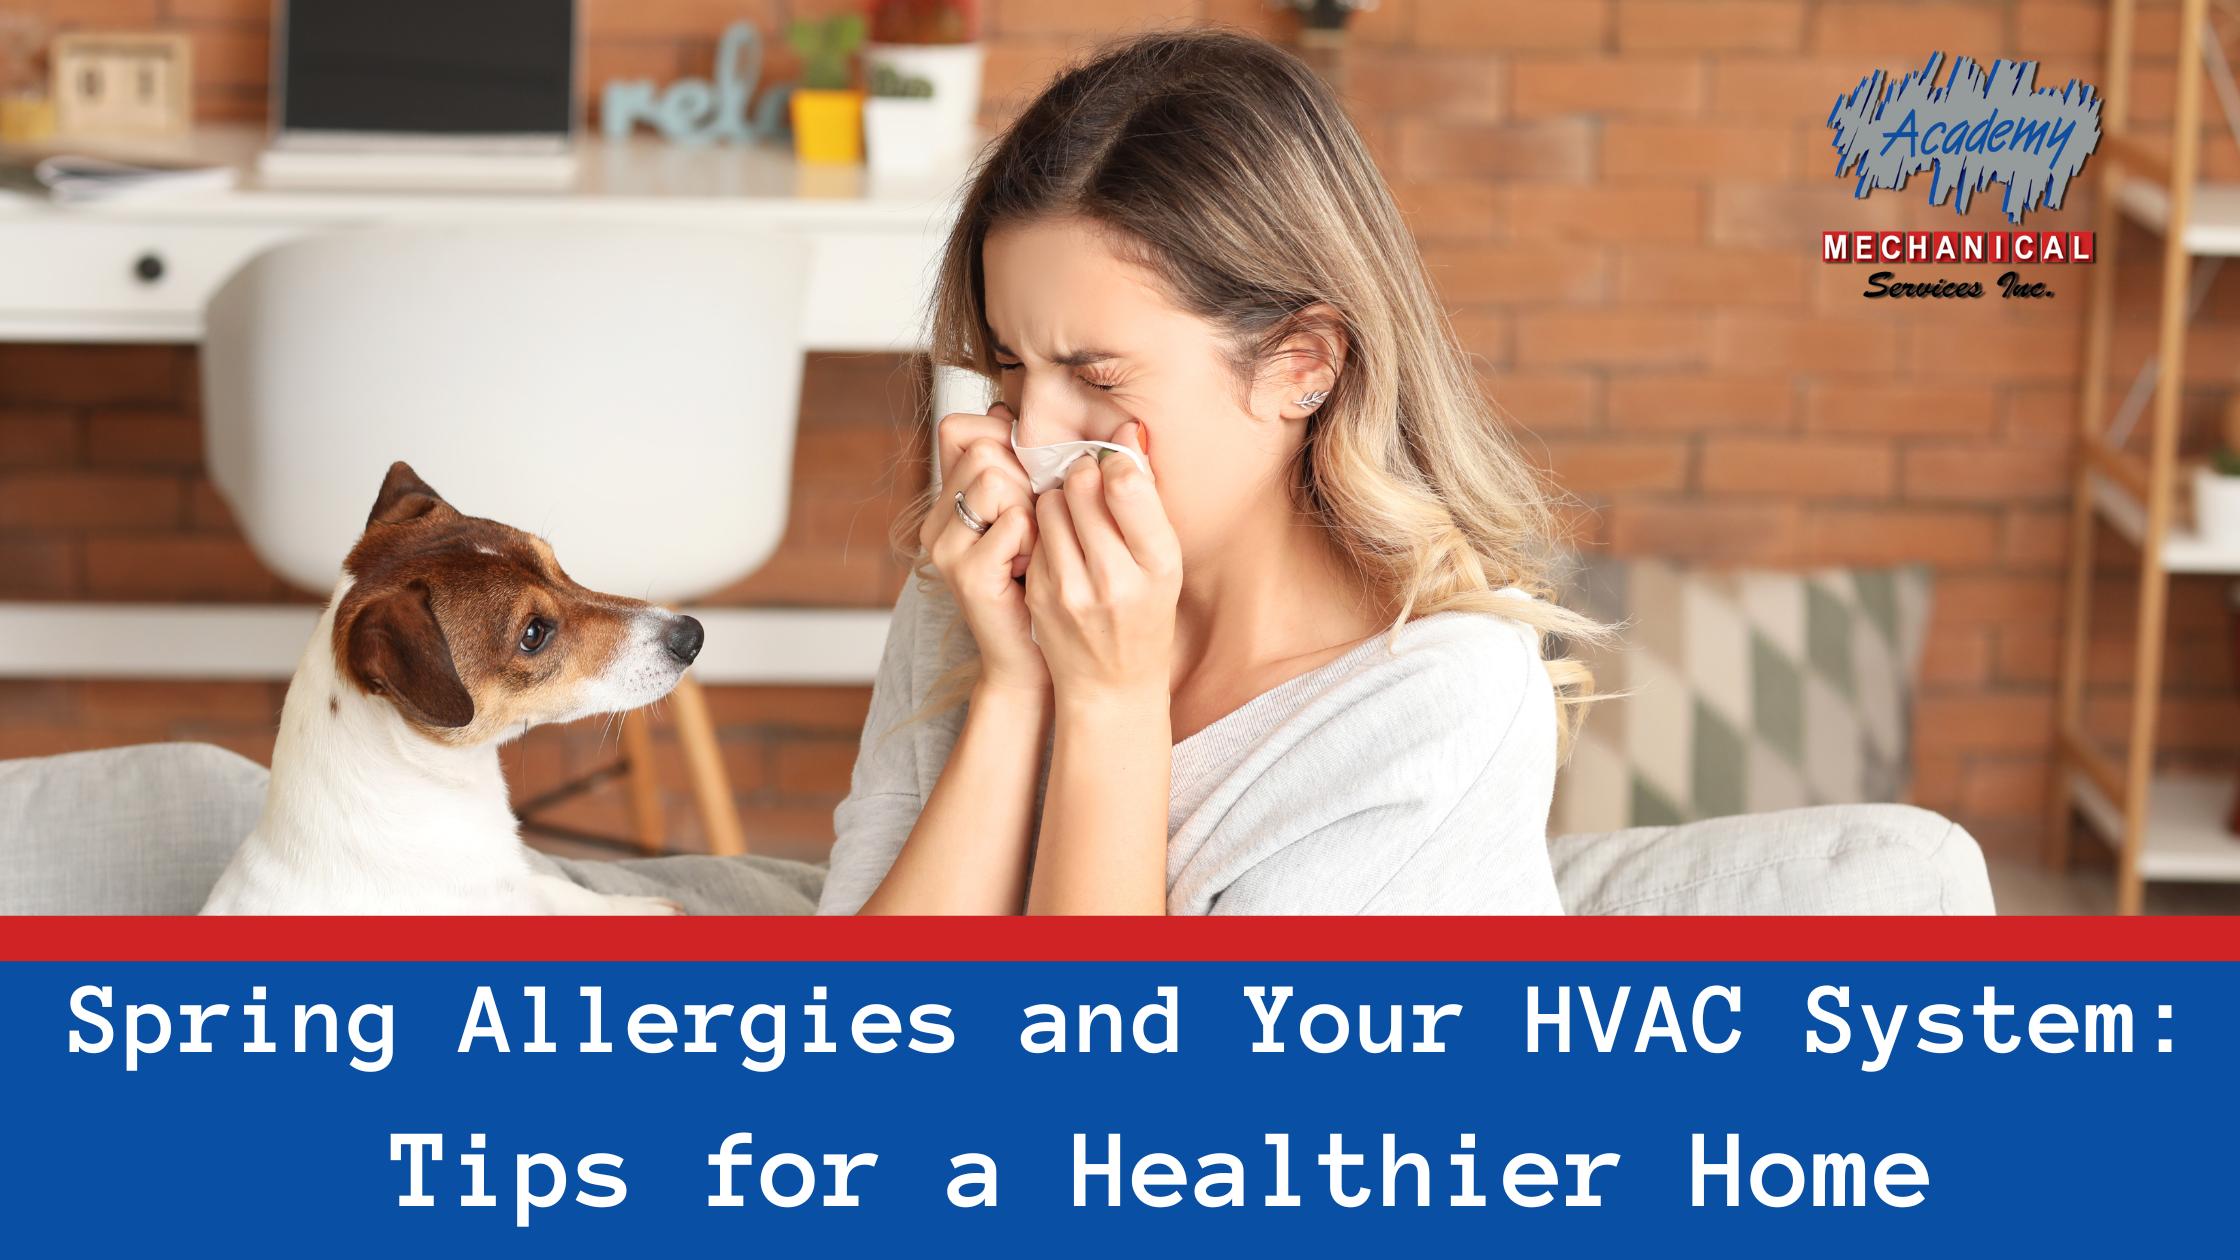 You are currently viewing Spring Allergies and Your HVAC System: Tips for a Healthier Home